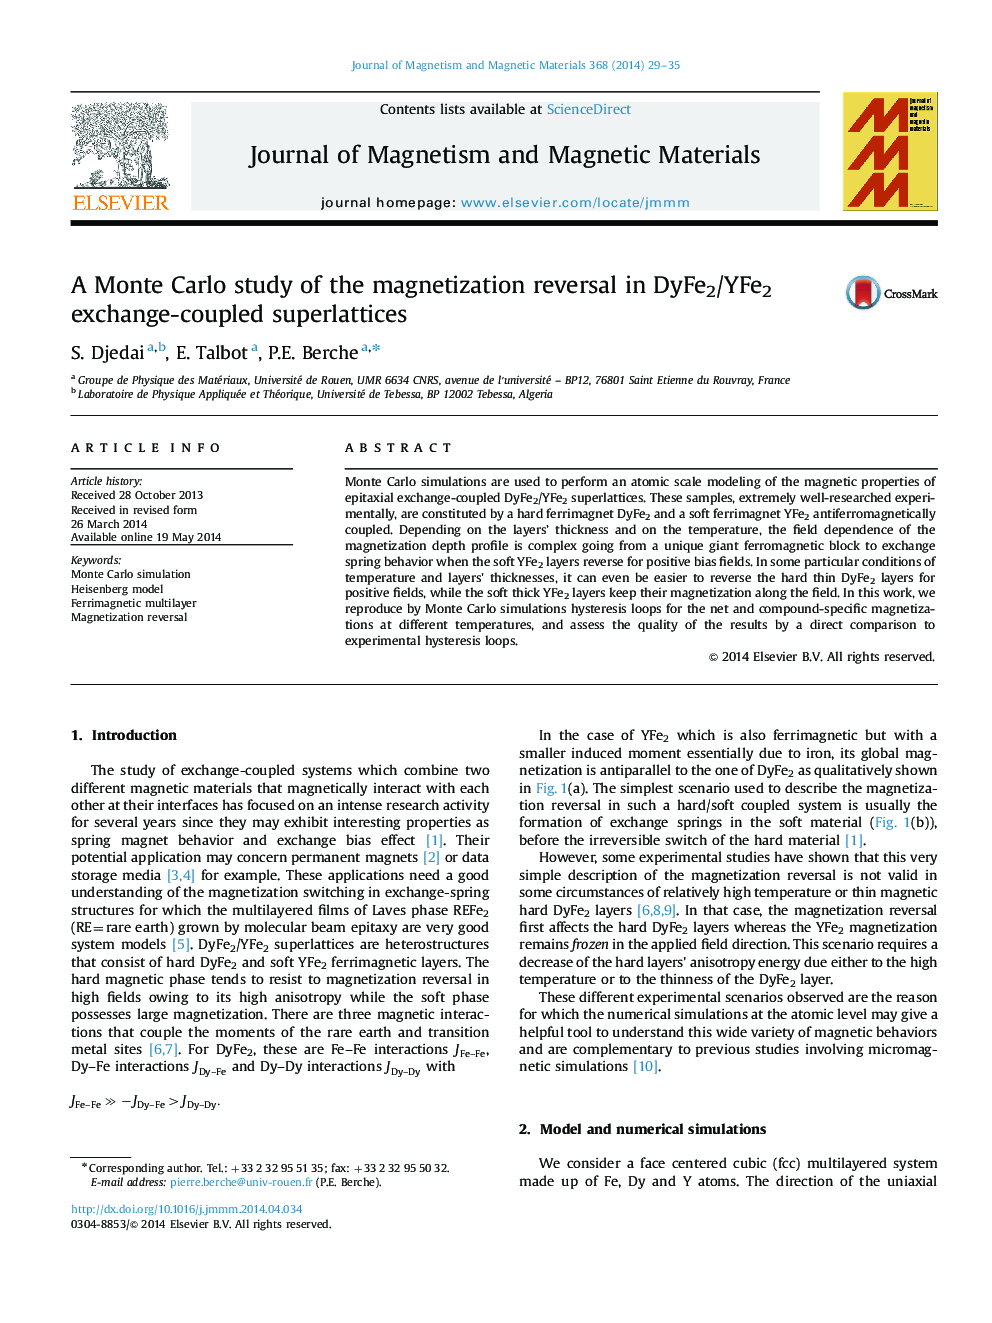 A Monte Carlo study of the magnetization reversal in DyFe2/YFe2 exchange-coupled superlattices